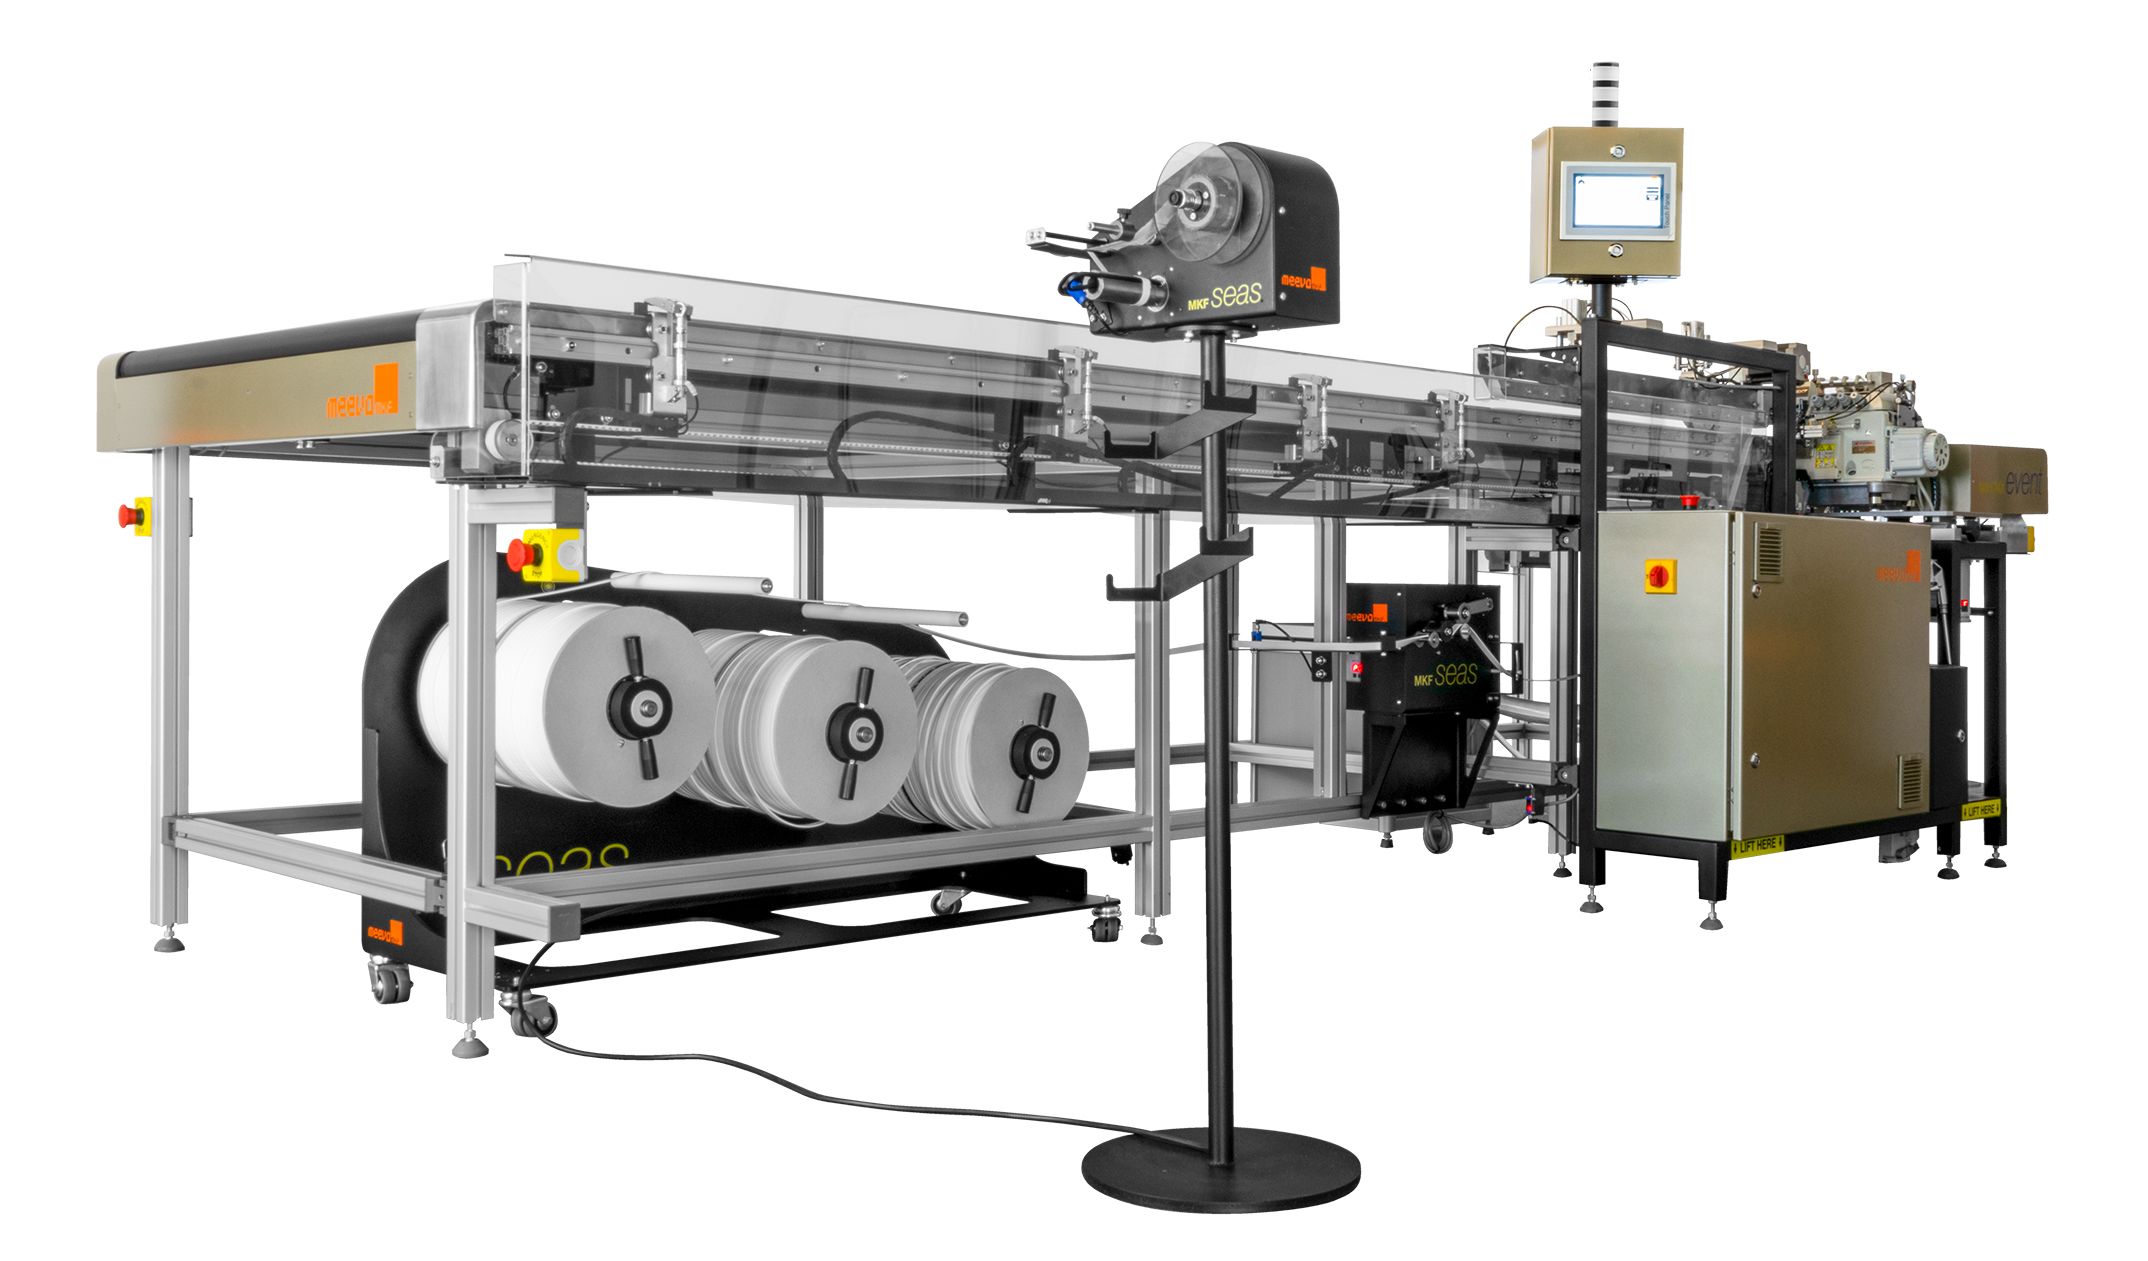 MEEVO Group at FESPA 2022 - SEG Finishing machines that increase productivity and efficiency